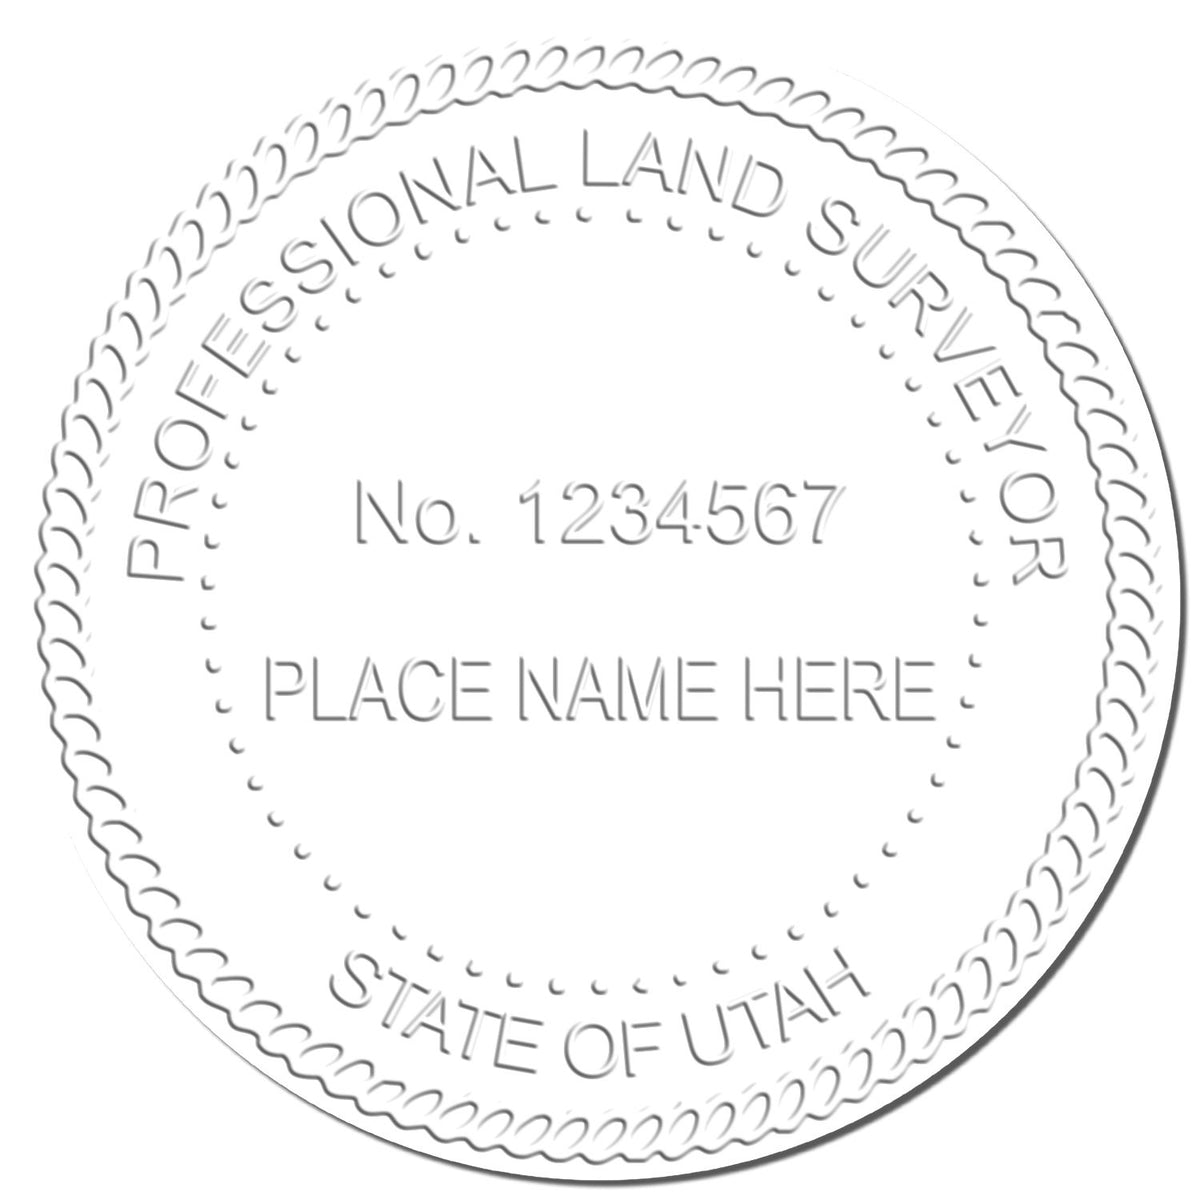 This paper is stamped with a sample imprint of the Gift Utah Land Surveyor Seal, signifying its quality and reliability.